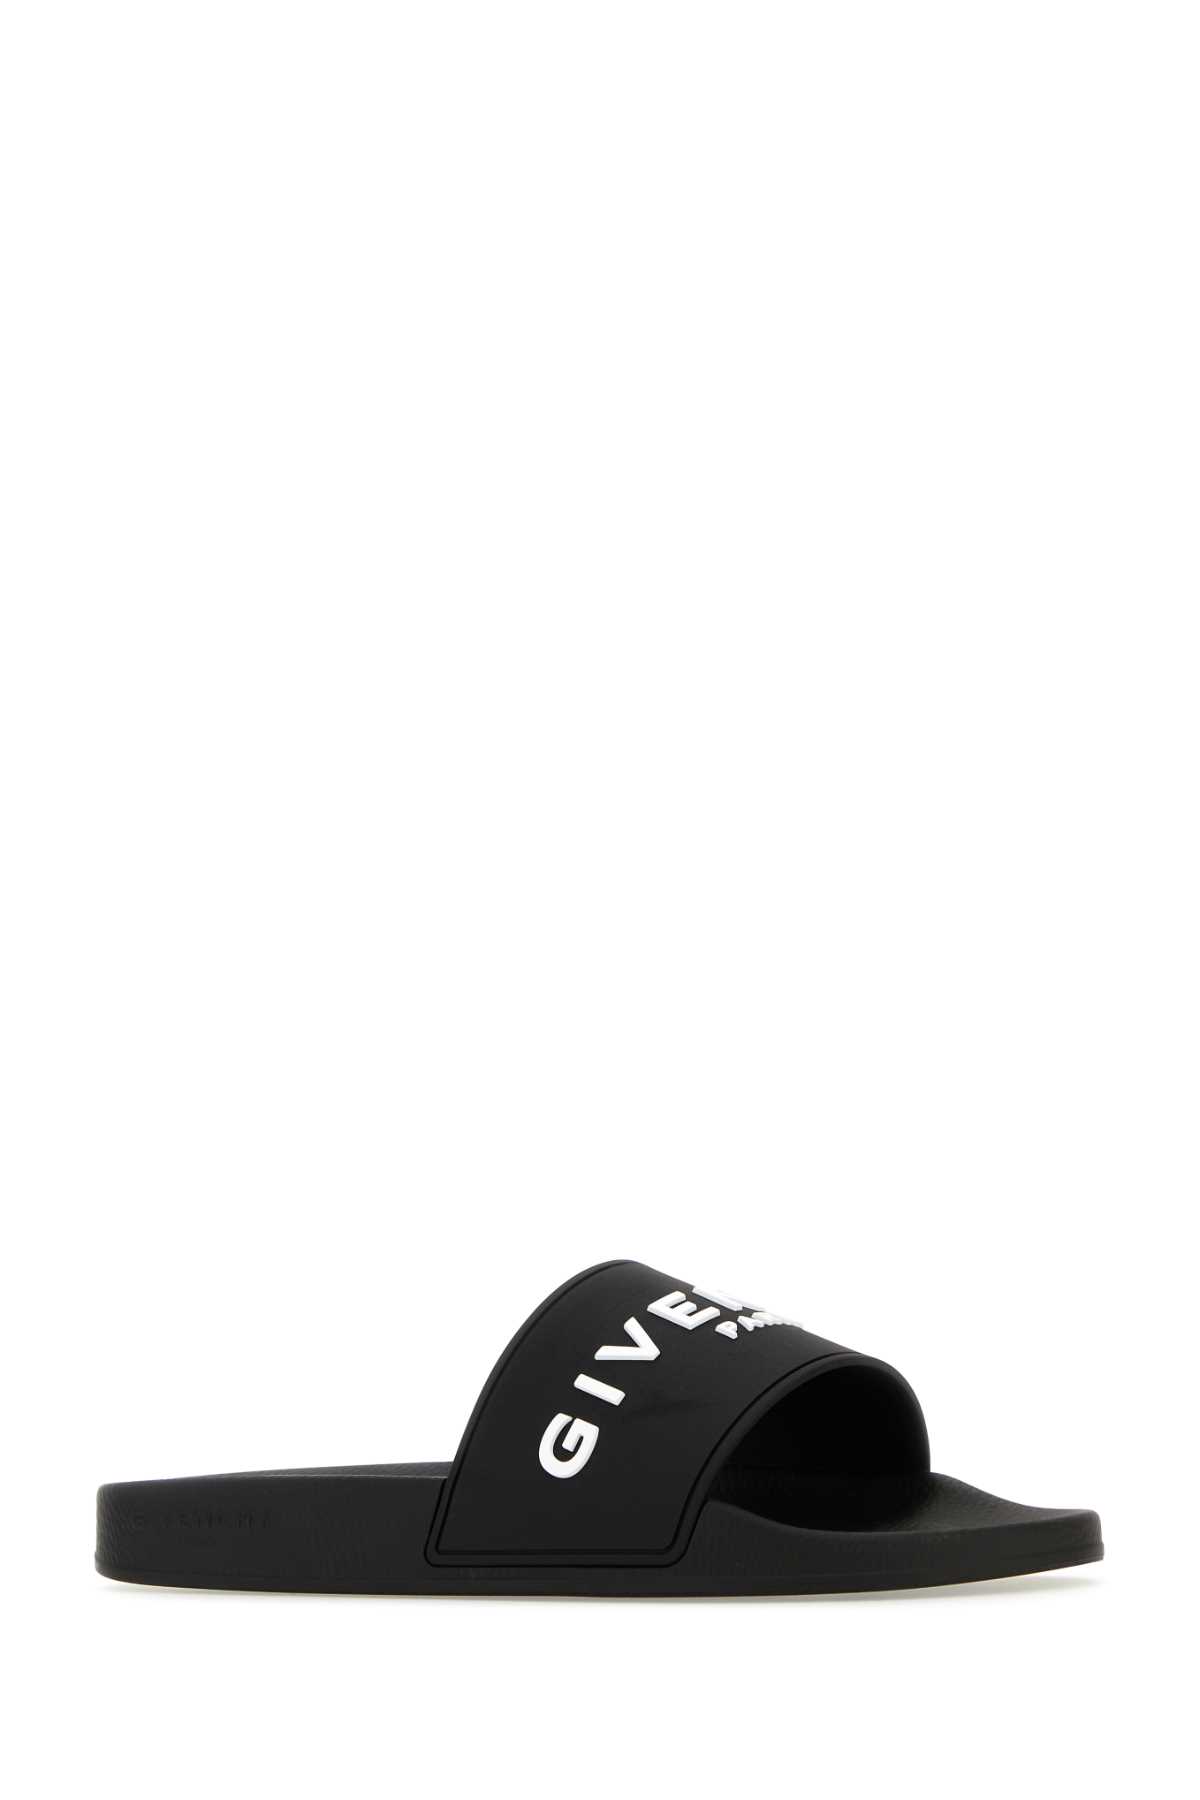 Givenchy Black Rubber Slippers